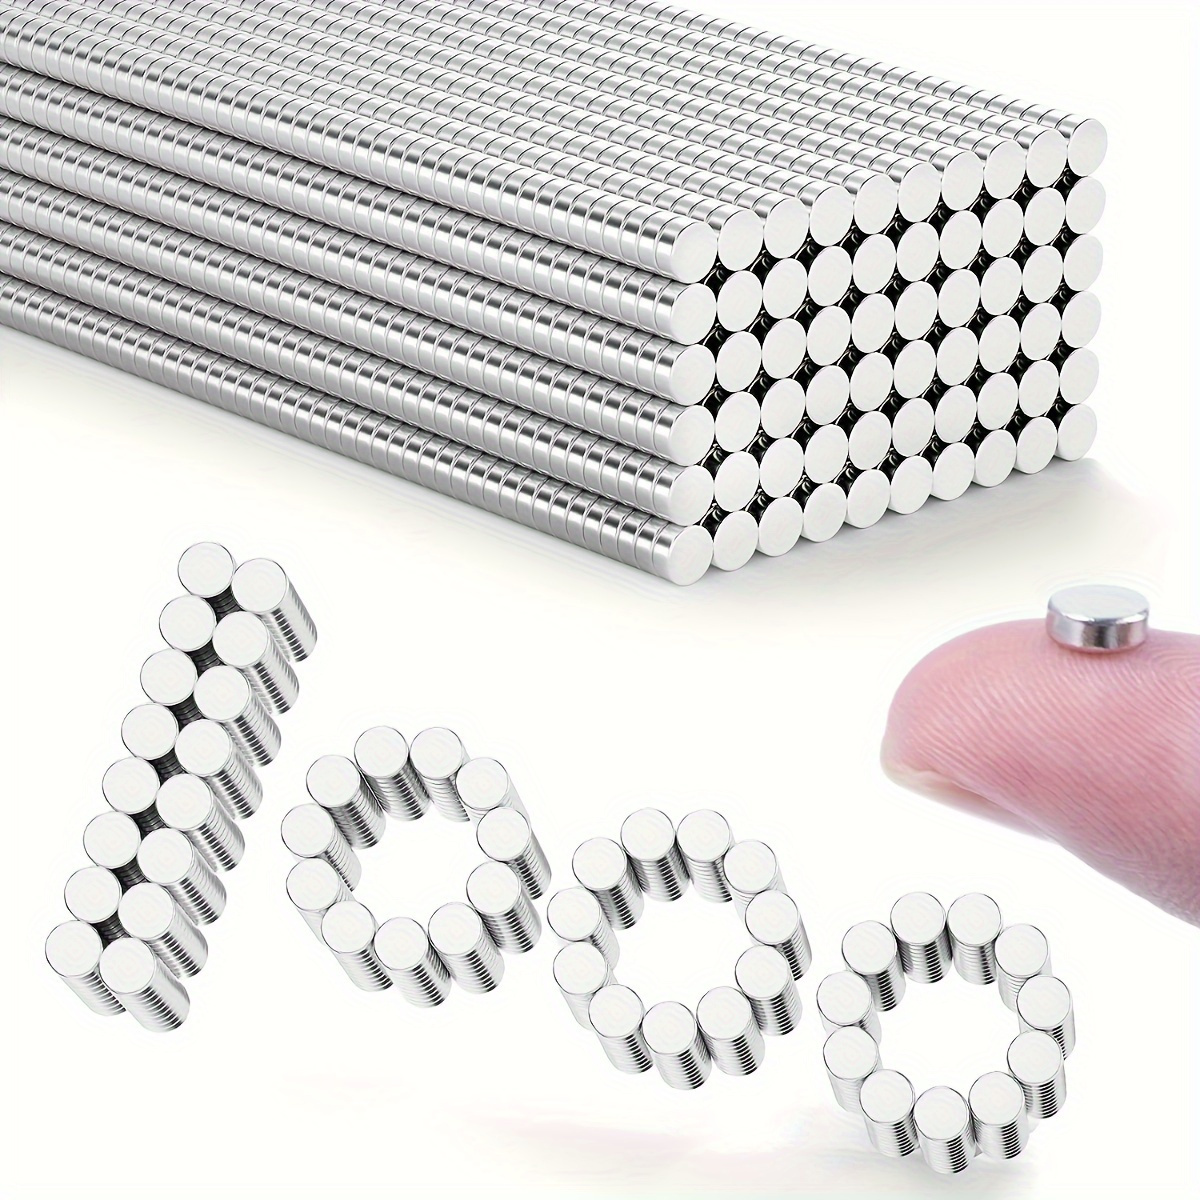 FINDMAG 100Pcs Strong Neodymium Magnets Bar, Heavy Duty Rare Earth Magnets,  Rectangular Magnetic Bar, Small Powerful Magnets for Crafts Kitchen DIY